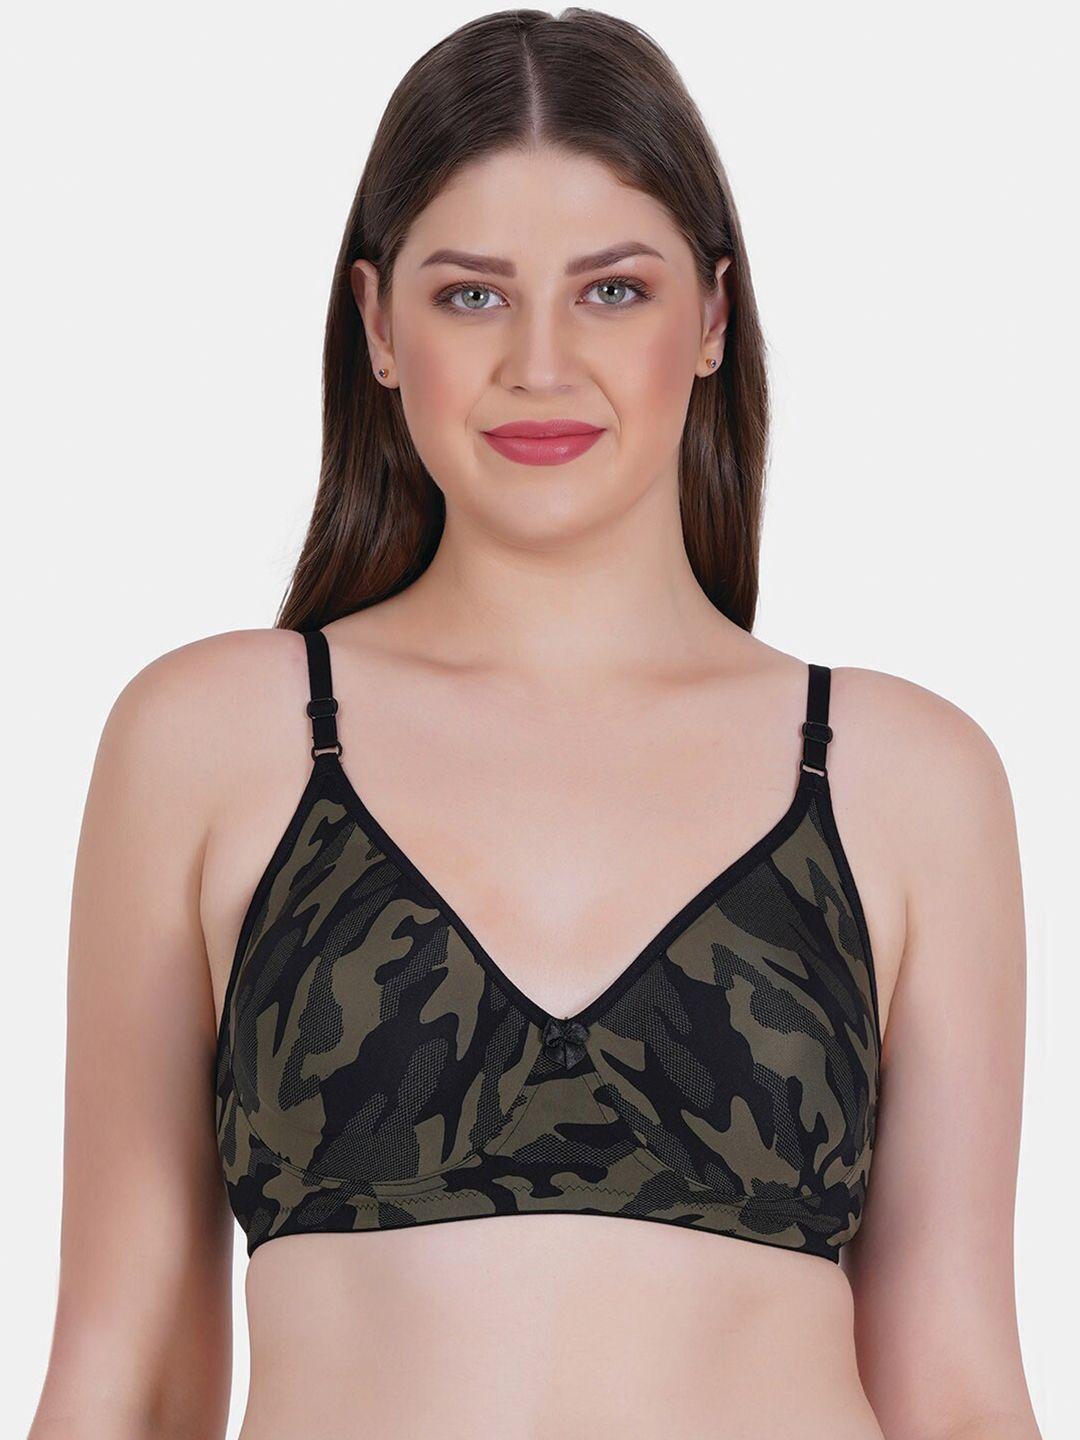 reveira-camouflage-printed-everyday-bra-with-dry-fit-full-coverage-all-day-comfort